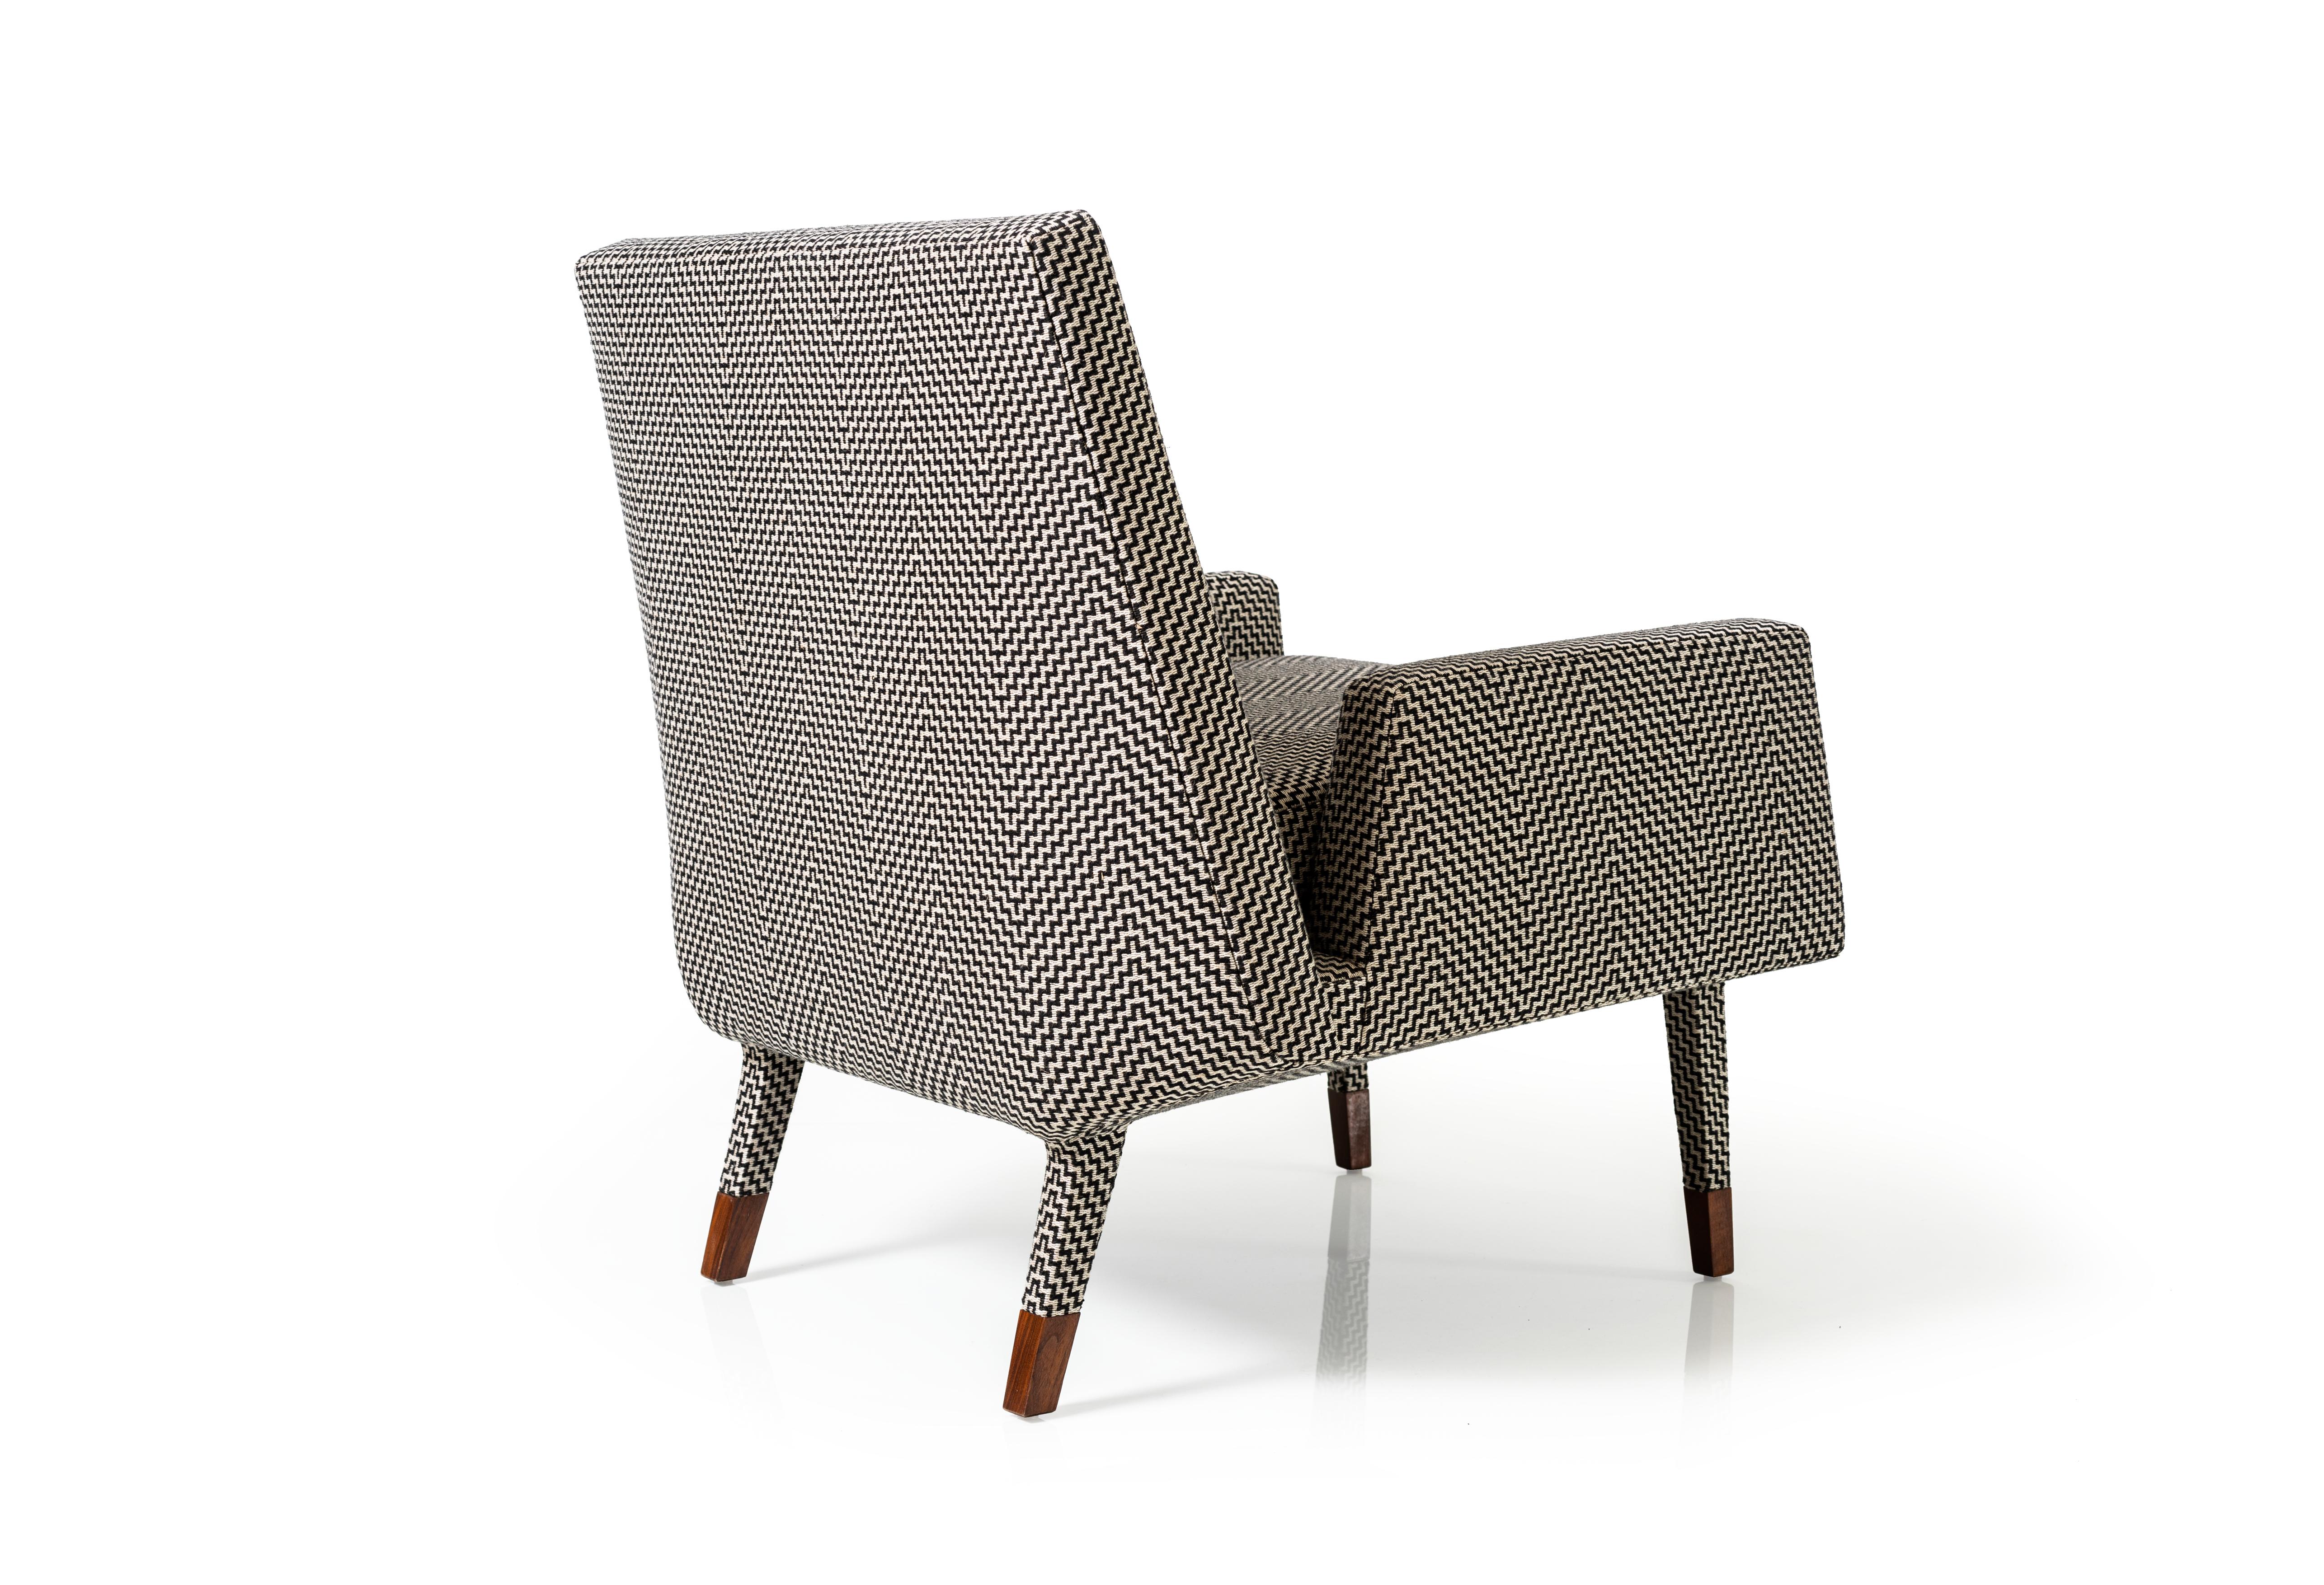 The Angott Club Chair has a softness and fluidity that is enhanced by the fully upholstered form. Fabric covers every part of the piece, including the chamfered base and a portion of the legs before they transition seamlessly to solid American Black